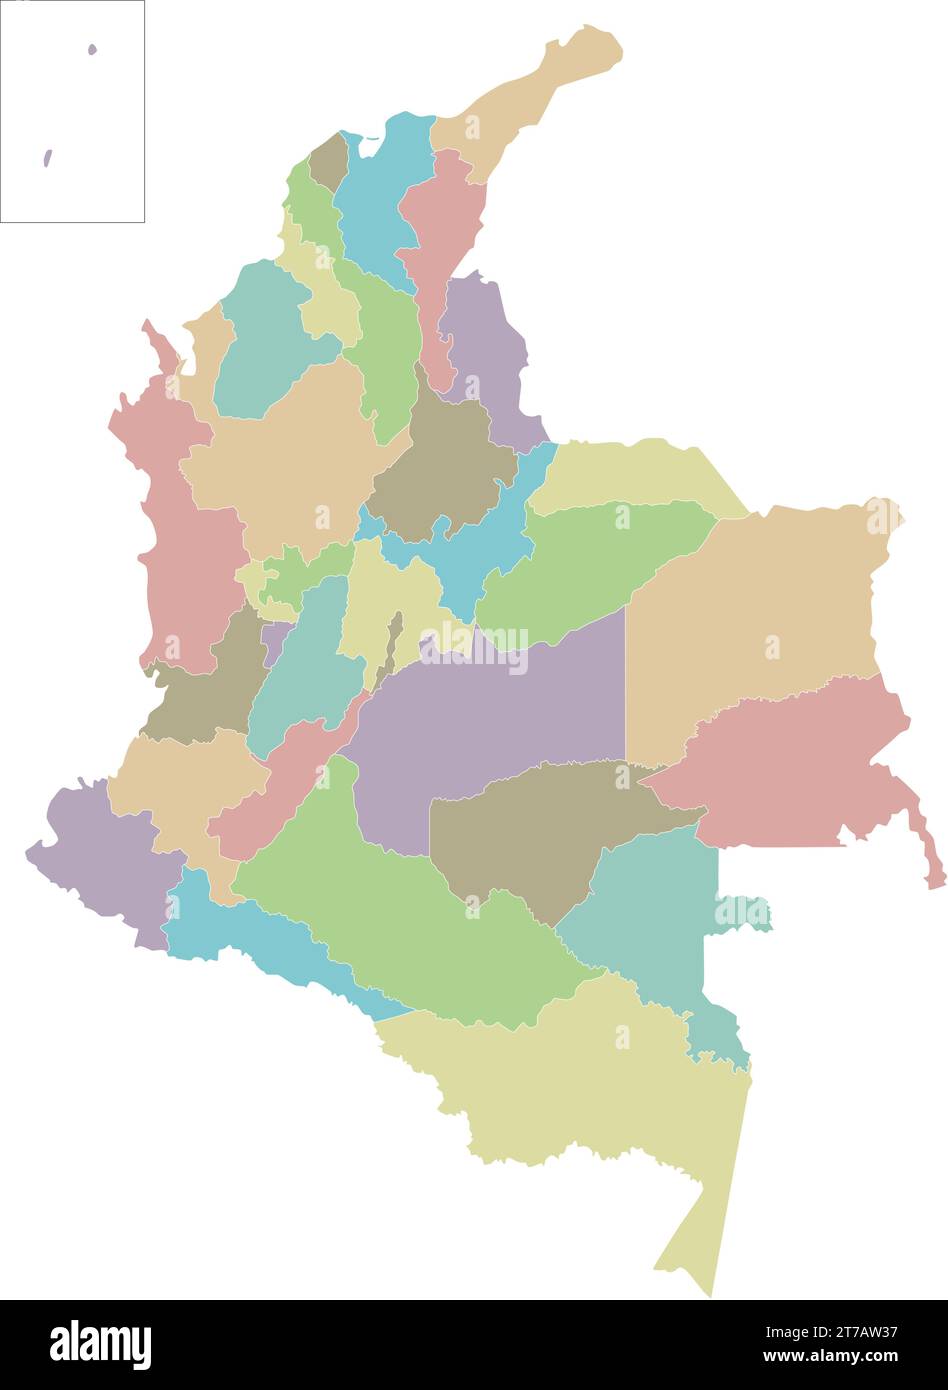 Vector blank map of Colombia with departments, capital region and administrative divisions. Editable and clearly labeled layers. Stock Vector